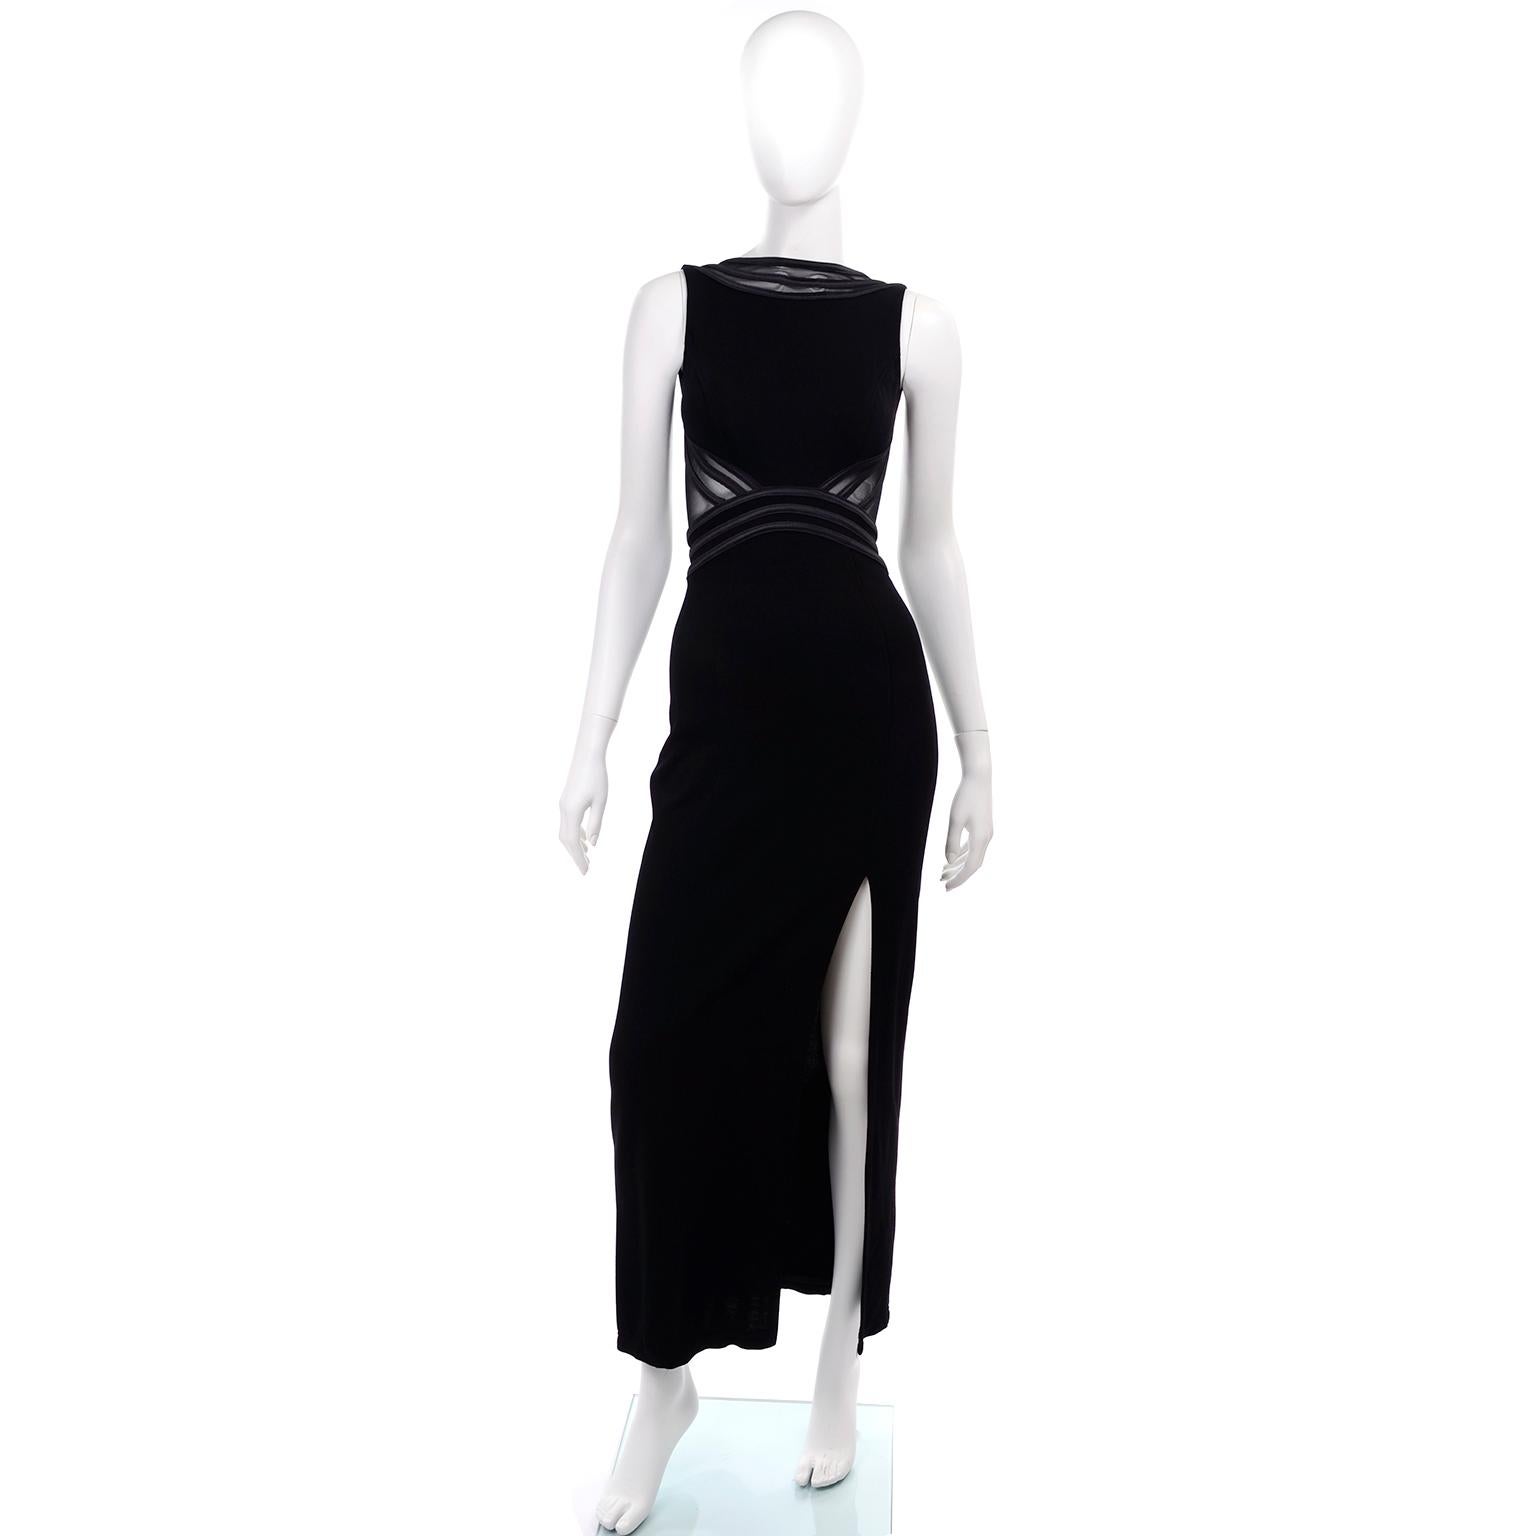 This Tadashi Shoji vintage dress is stunning with its mesh inserts and high slit.  It was designed in the 1990's and is a good example of Tadashi's earlier designs with a flare for the dramatic in a subtle way!  This black crepe dress is piped in